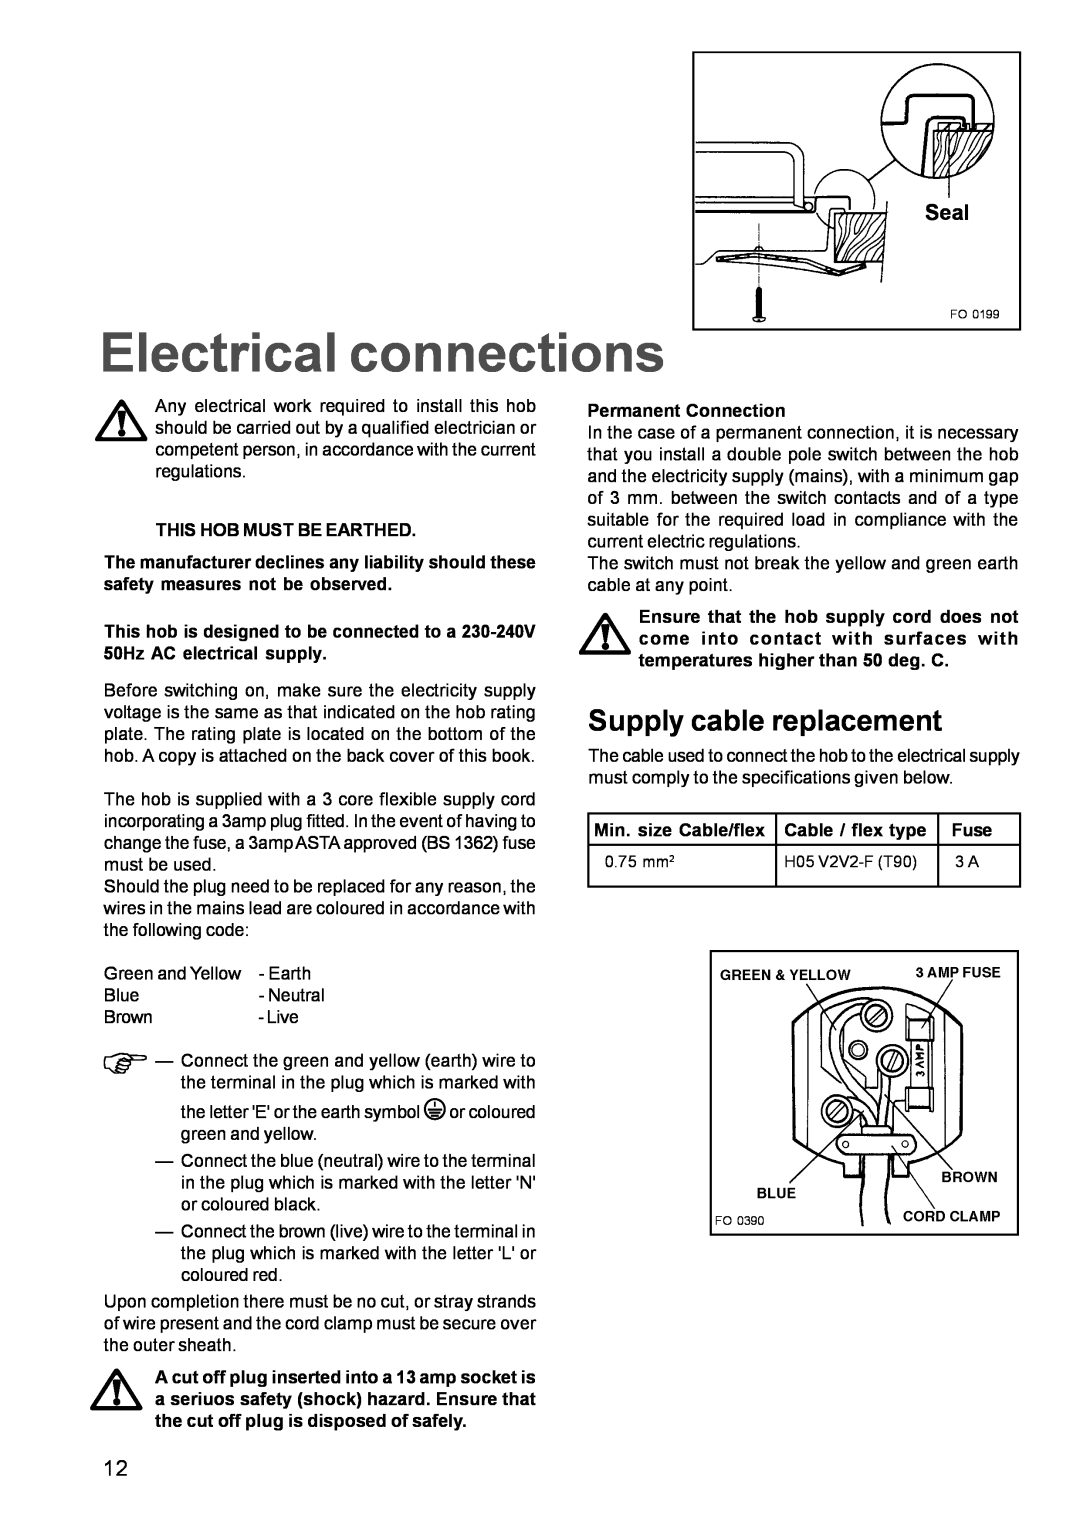 Zanussi ZGF982C manual Electrical connections, Supply cable replacement, Seal 